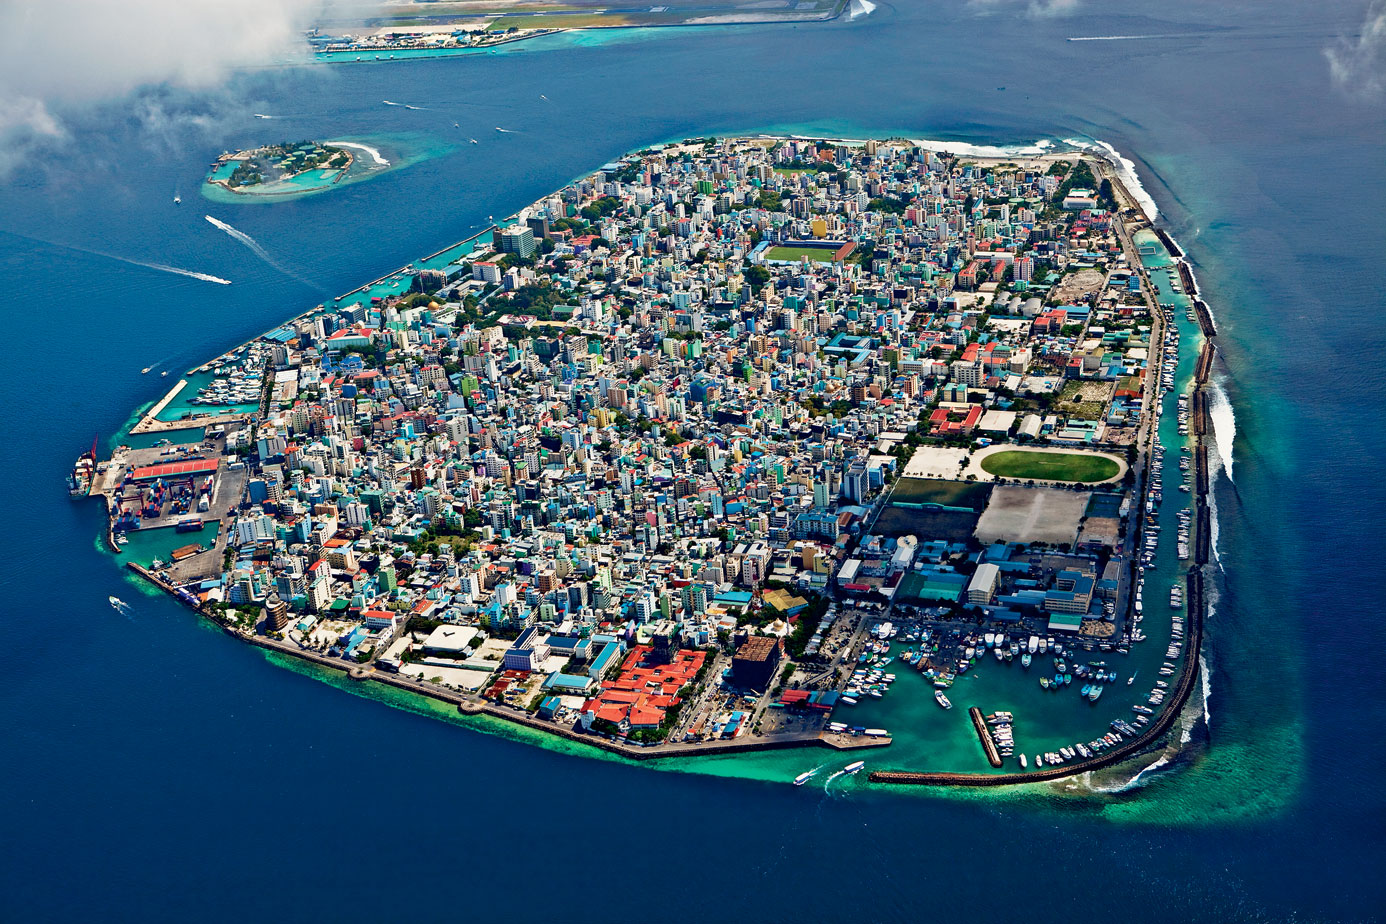 "The Maldives as a canary in a climate-change coal mine" (Bailey, 2010)